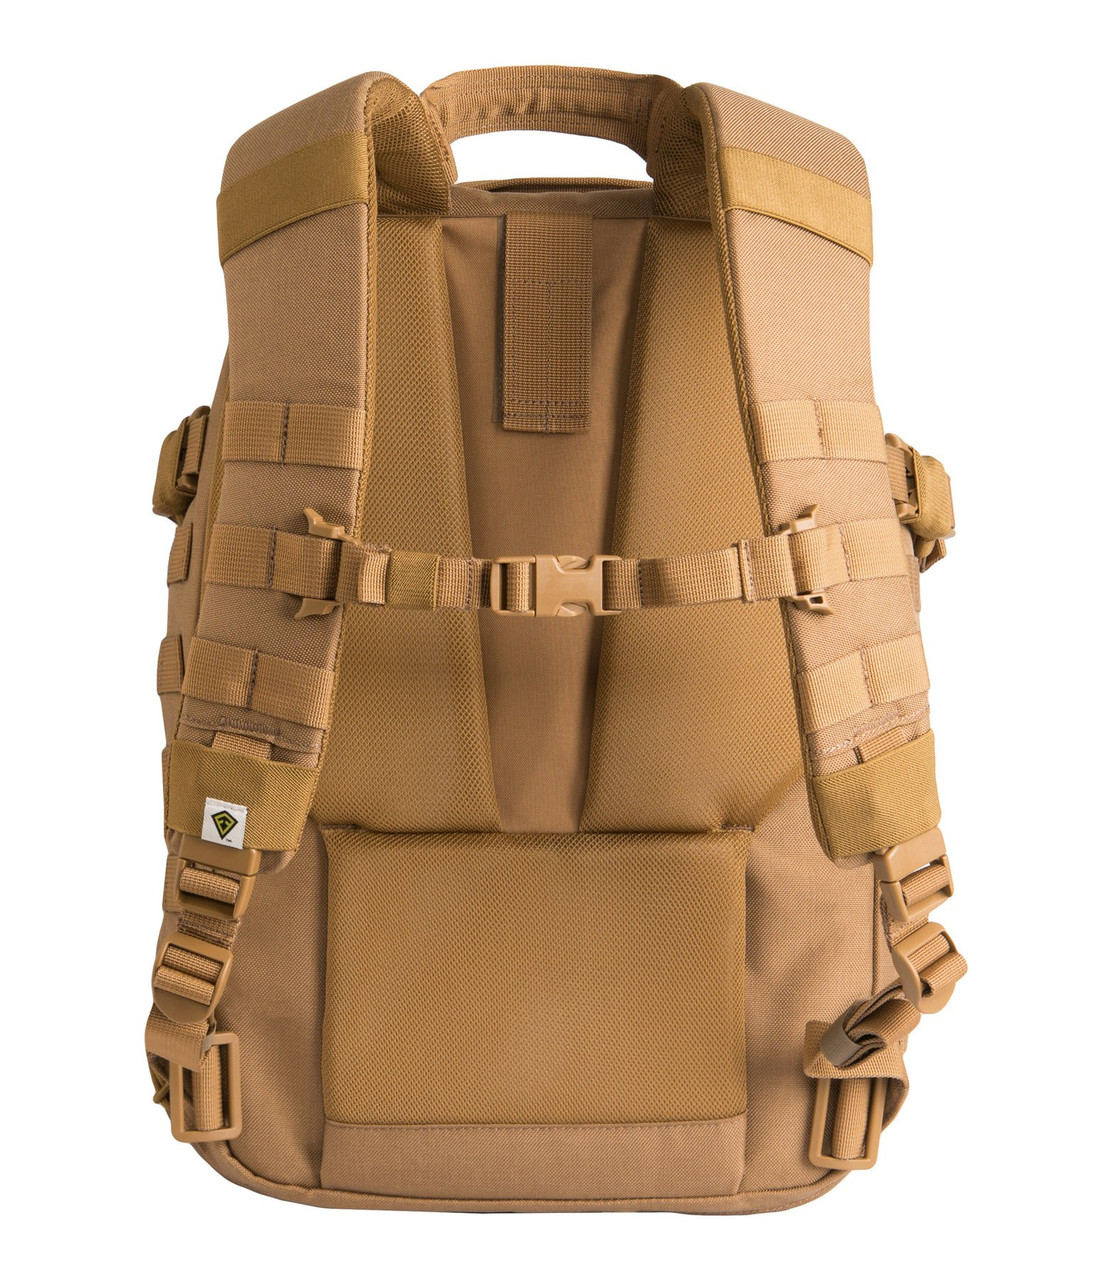 Specialist One Day Backpack - 36 Litre - First Tactical